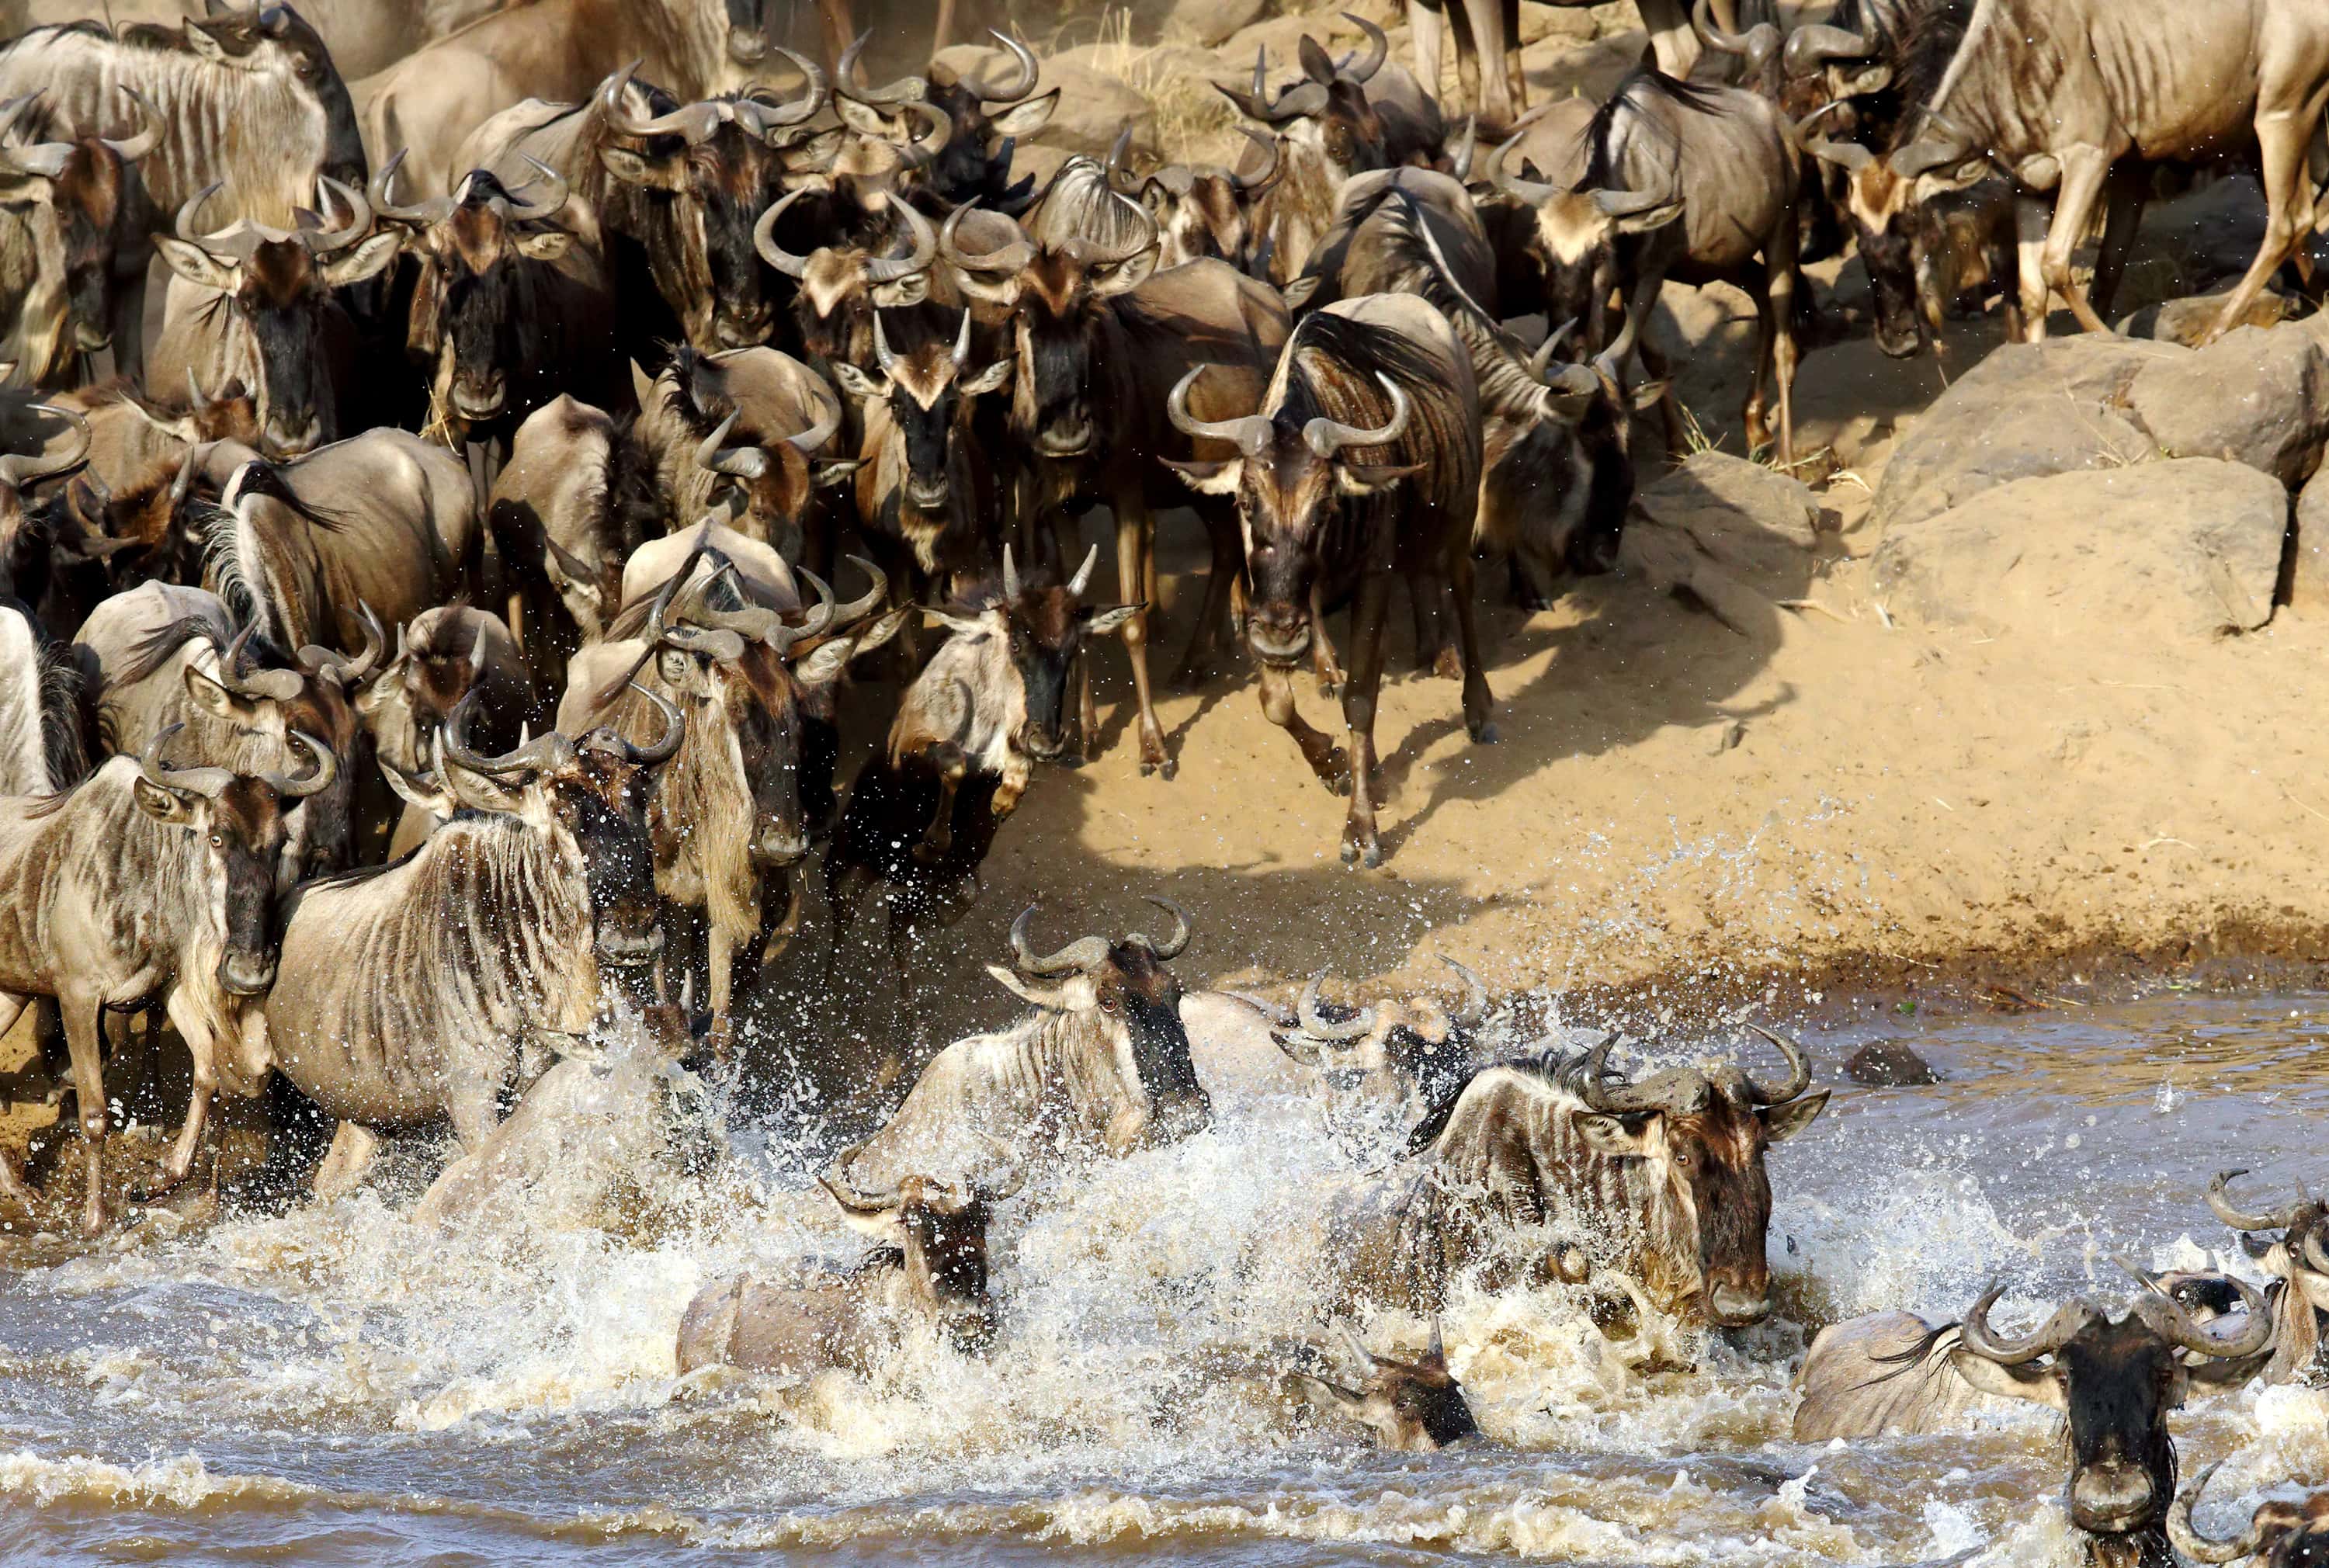 The great migration